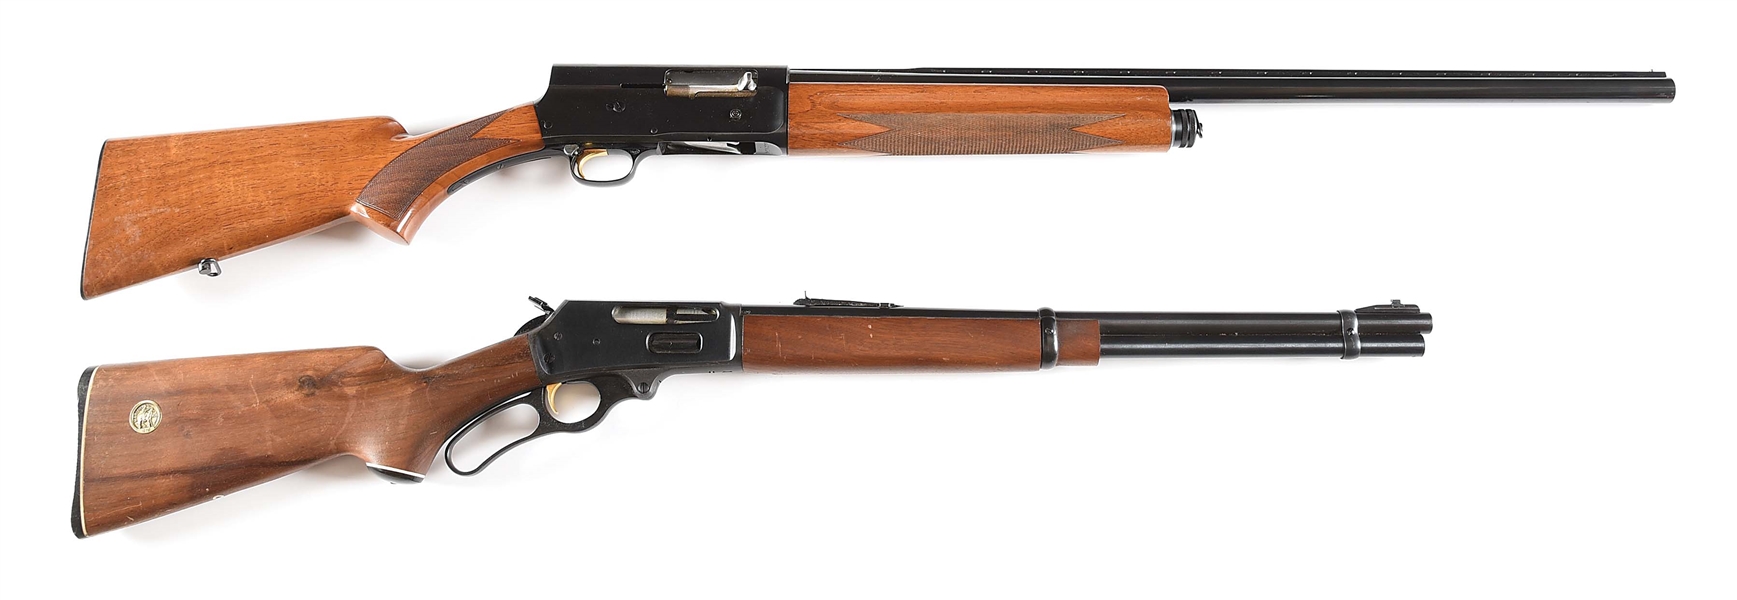 (C) LOT OF 2: FN A5 SEMI-AUTOMATIC SHOTGUN AND MARLIN MODEL 336 LEVER ACTION RIFLE.